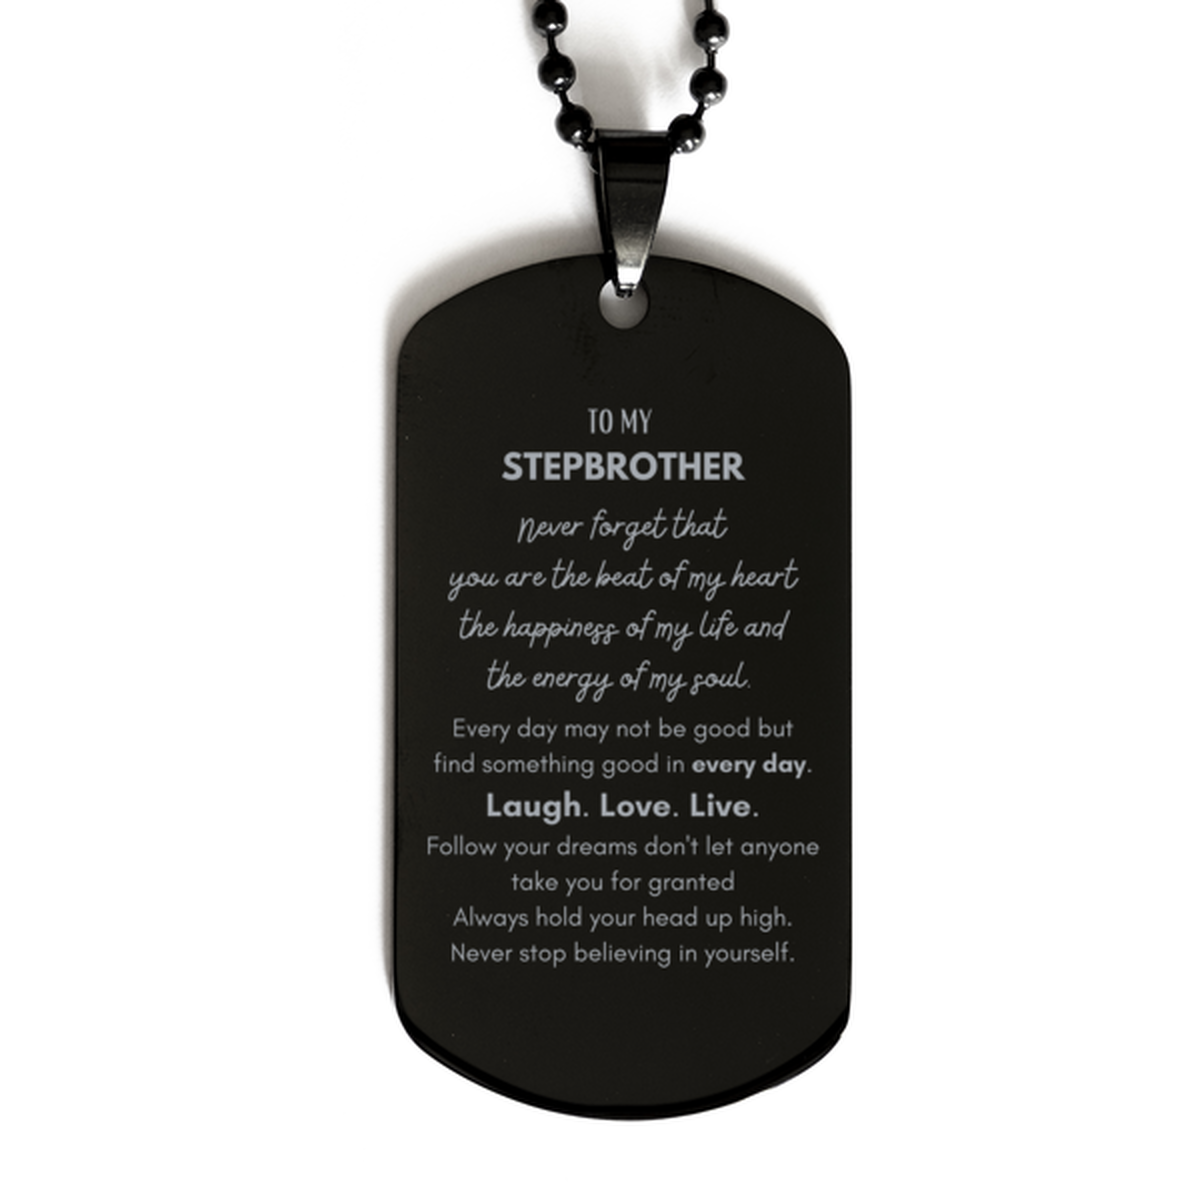 To My Stepbrother Dogtag Gifts, Christmas Stepbrother Black Dog Tag Present, Birthday Unique Motivational For Stepbrother, To My Stepbrother Never forget that you are the beat of my heart the happiness of my life and the energy of my soul